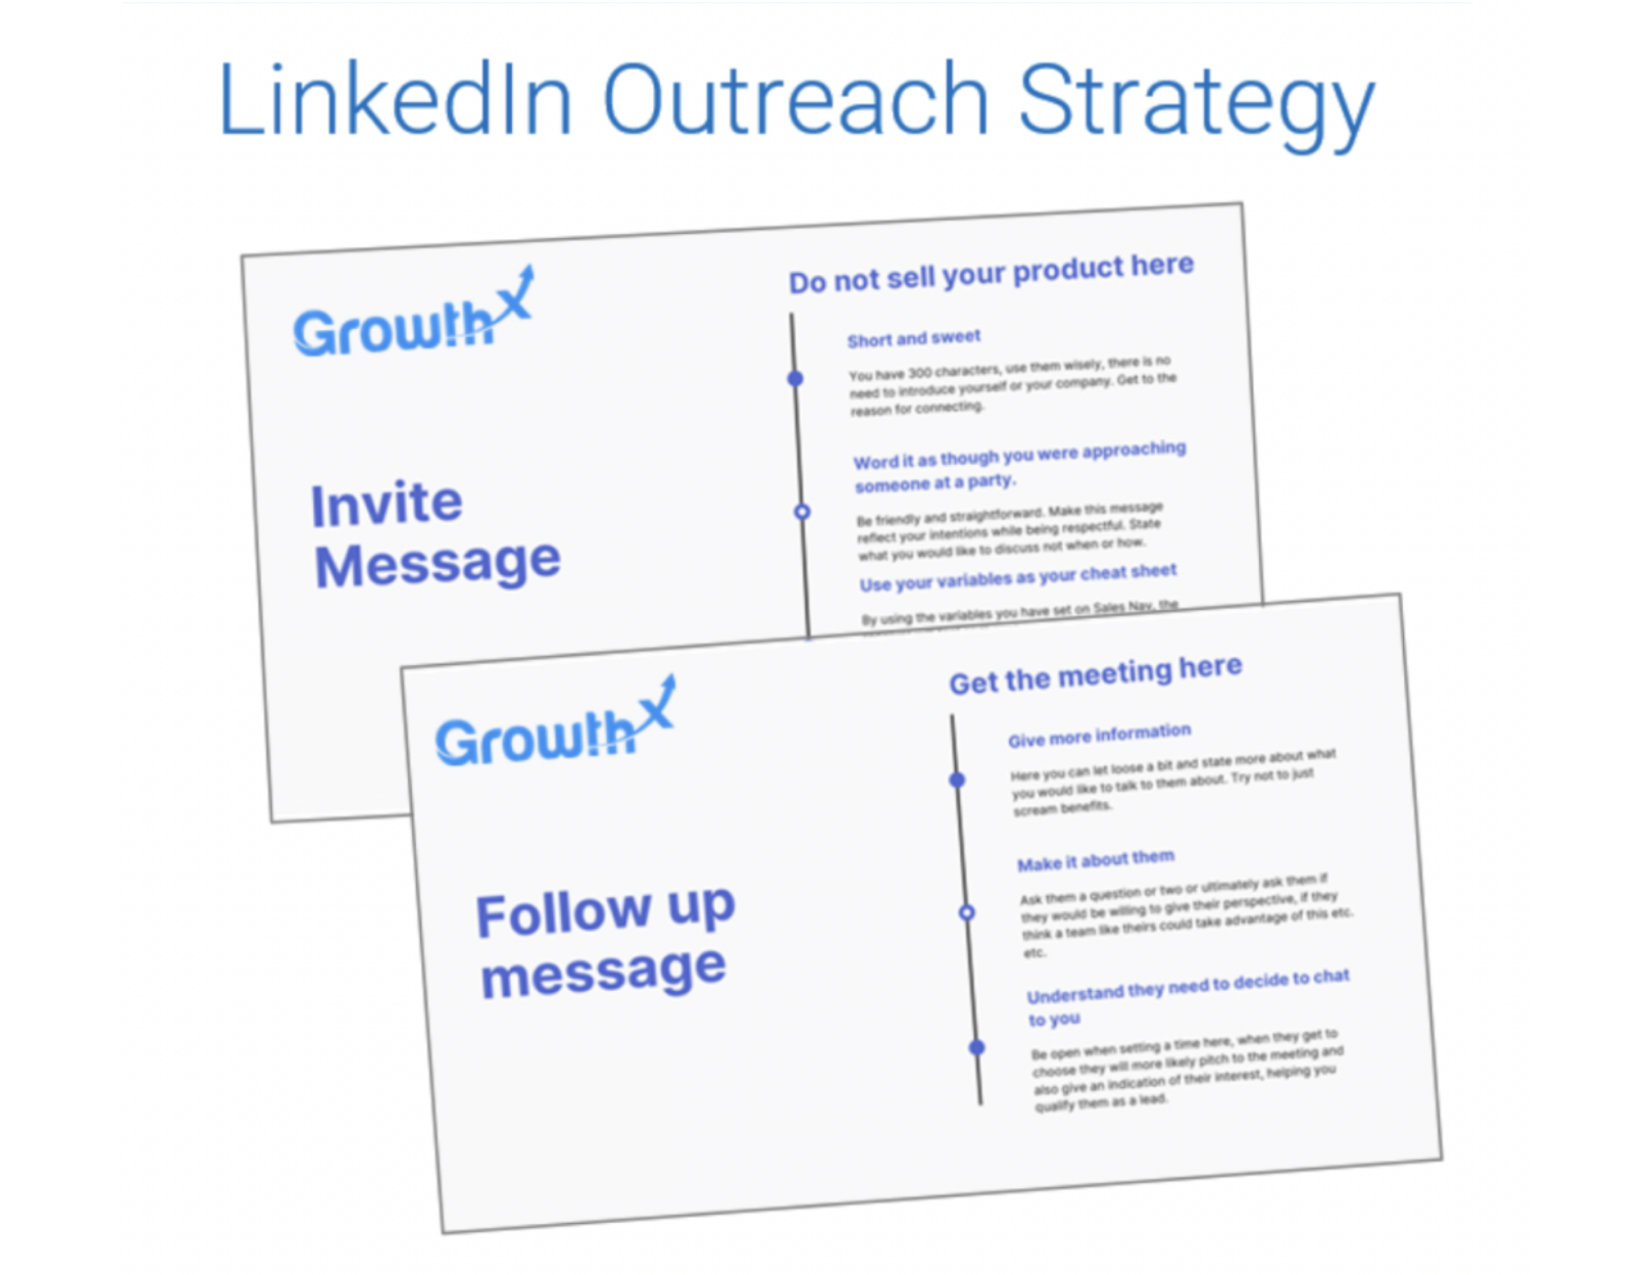 How To Develop An Effective LinkedIn Outreach Strategy